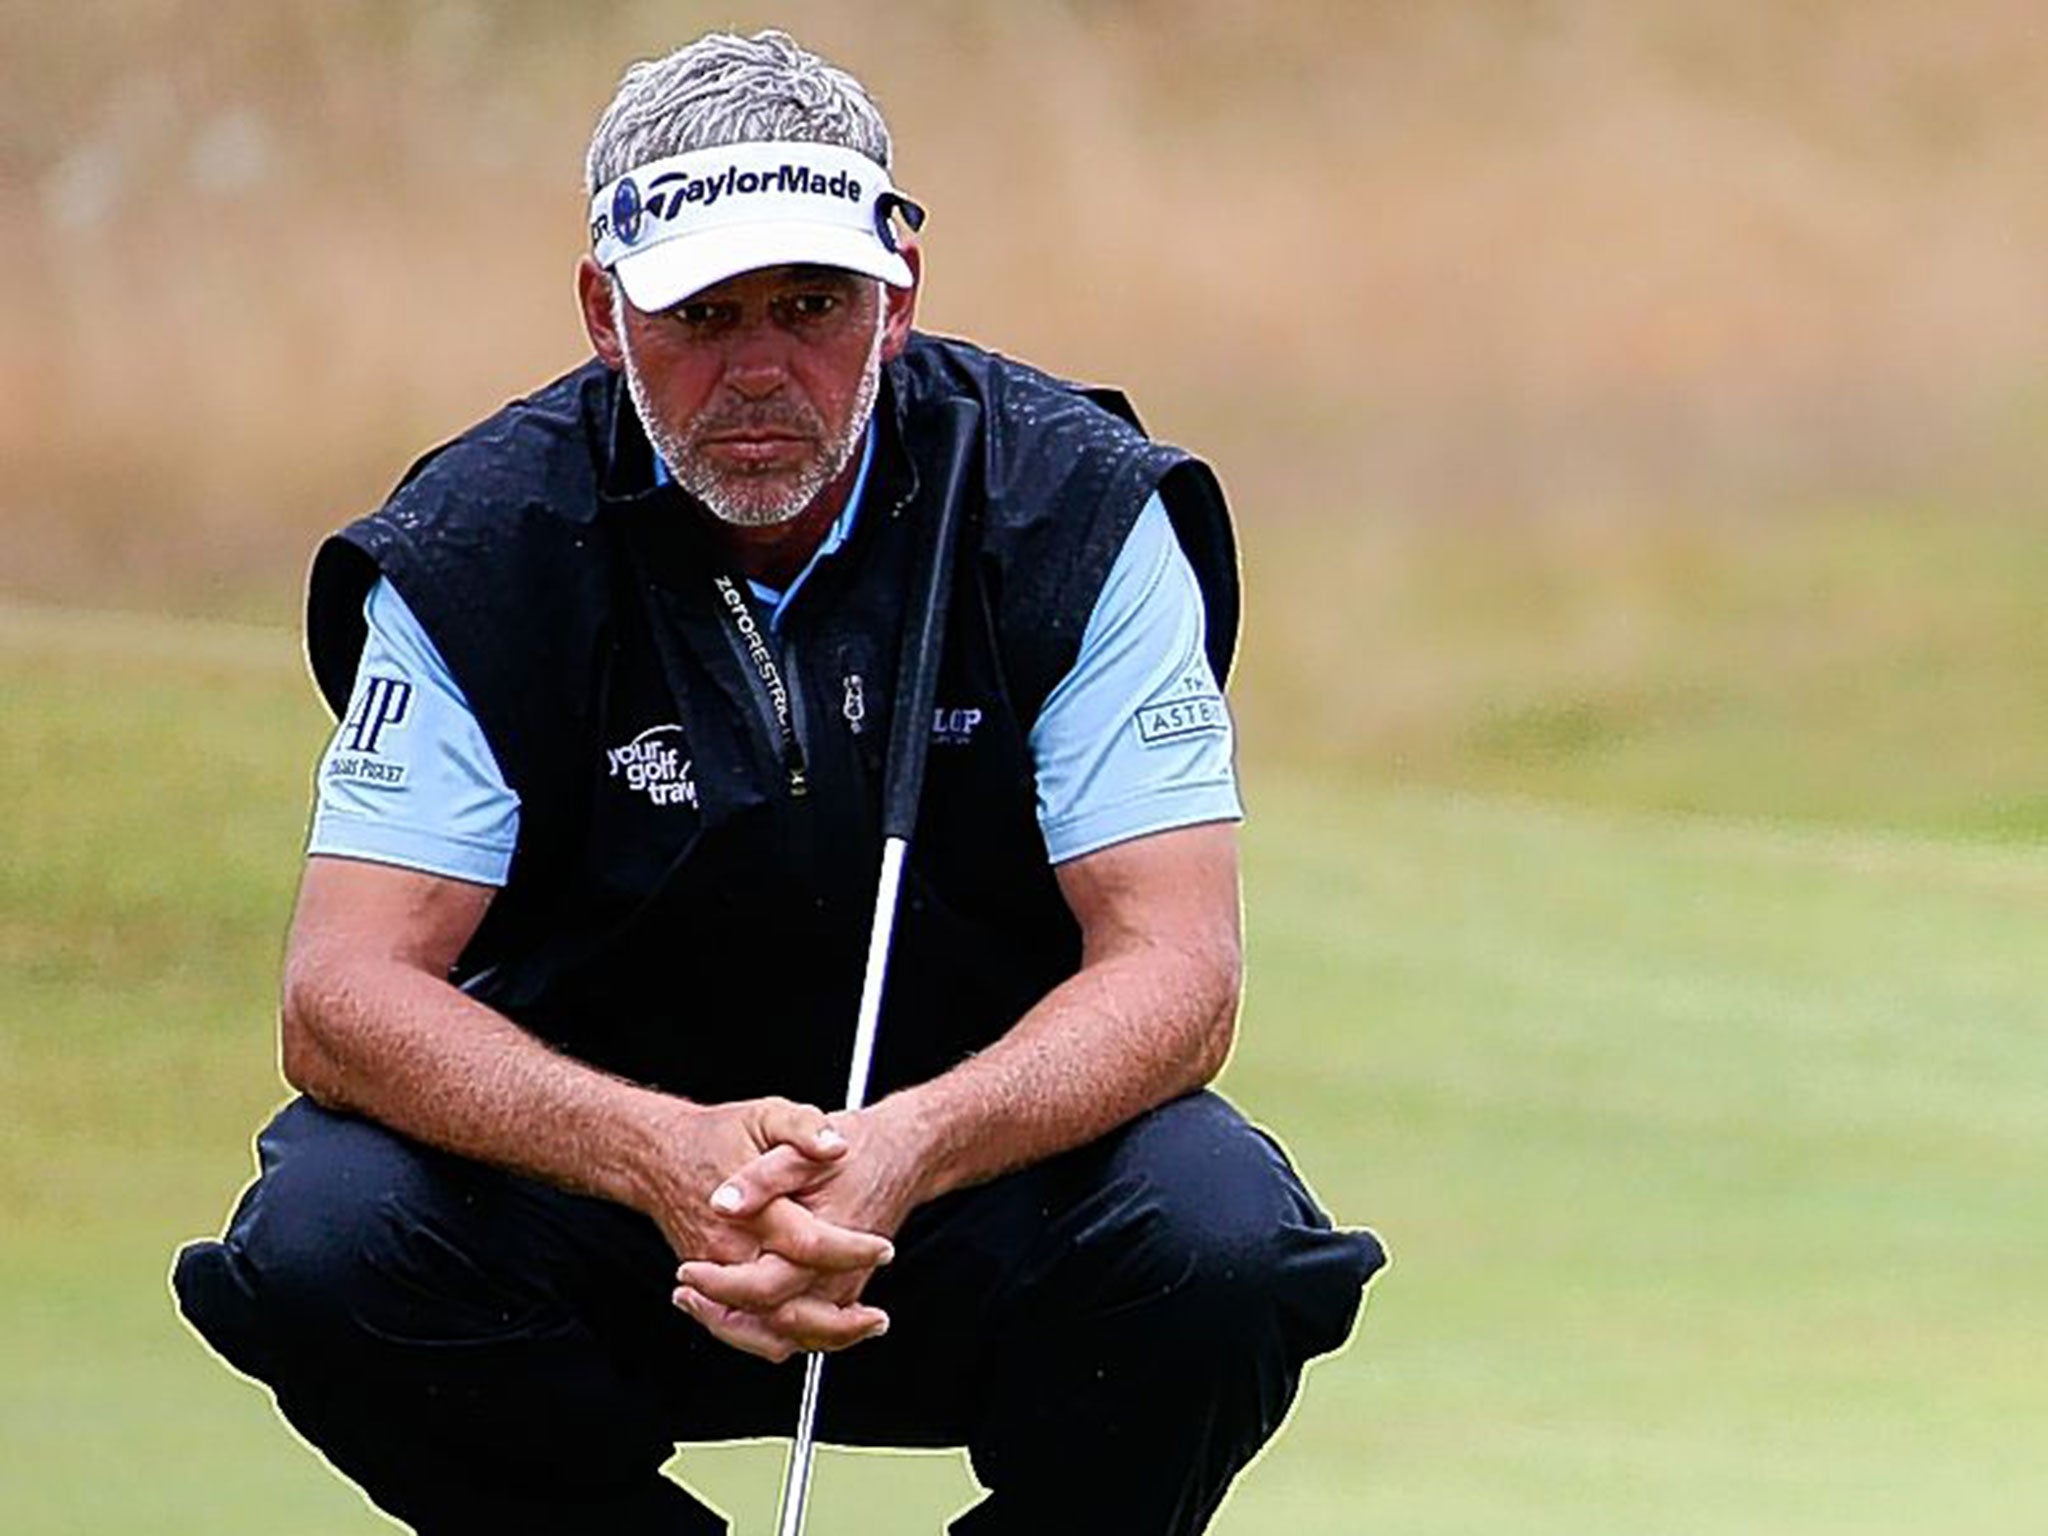 Lost in thought: Darren Clarke, who carded a 67 to take him to joint 12th, weighs up his options during the third round